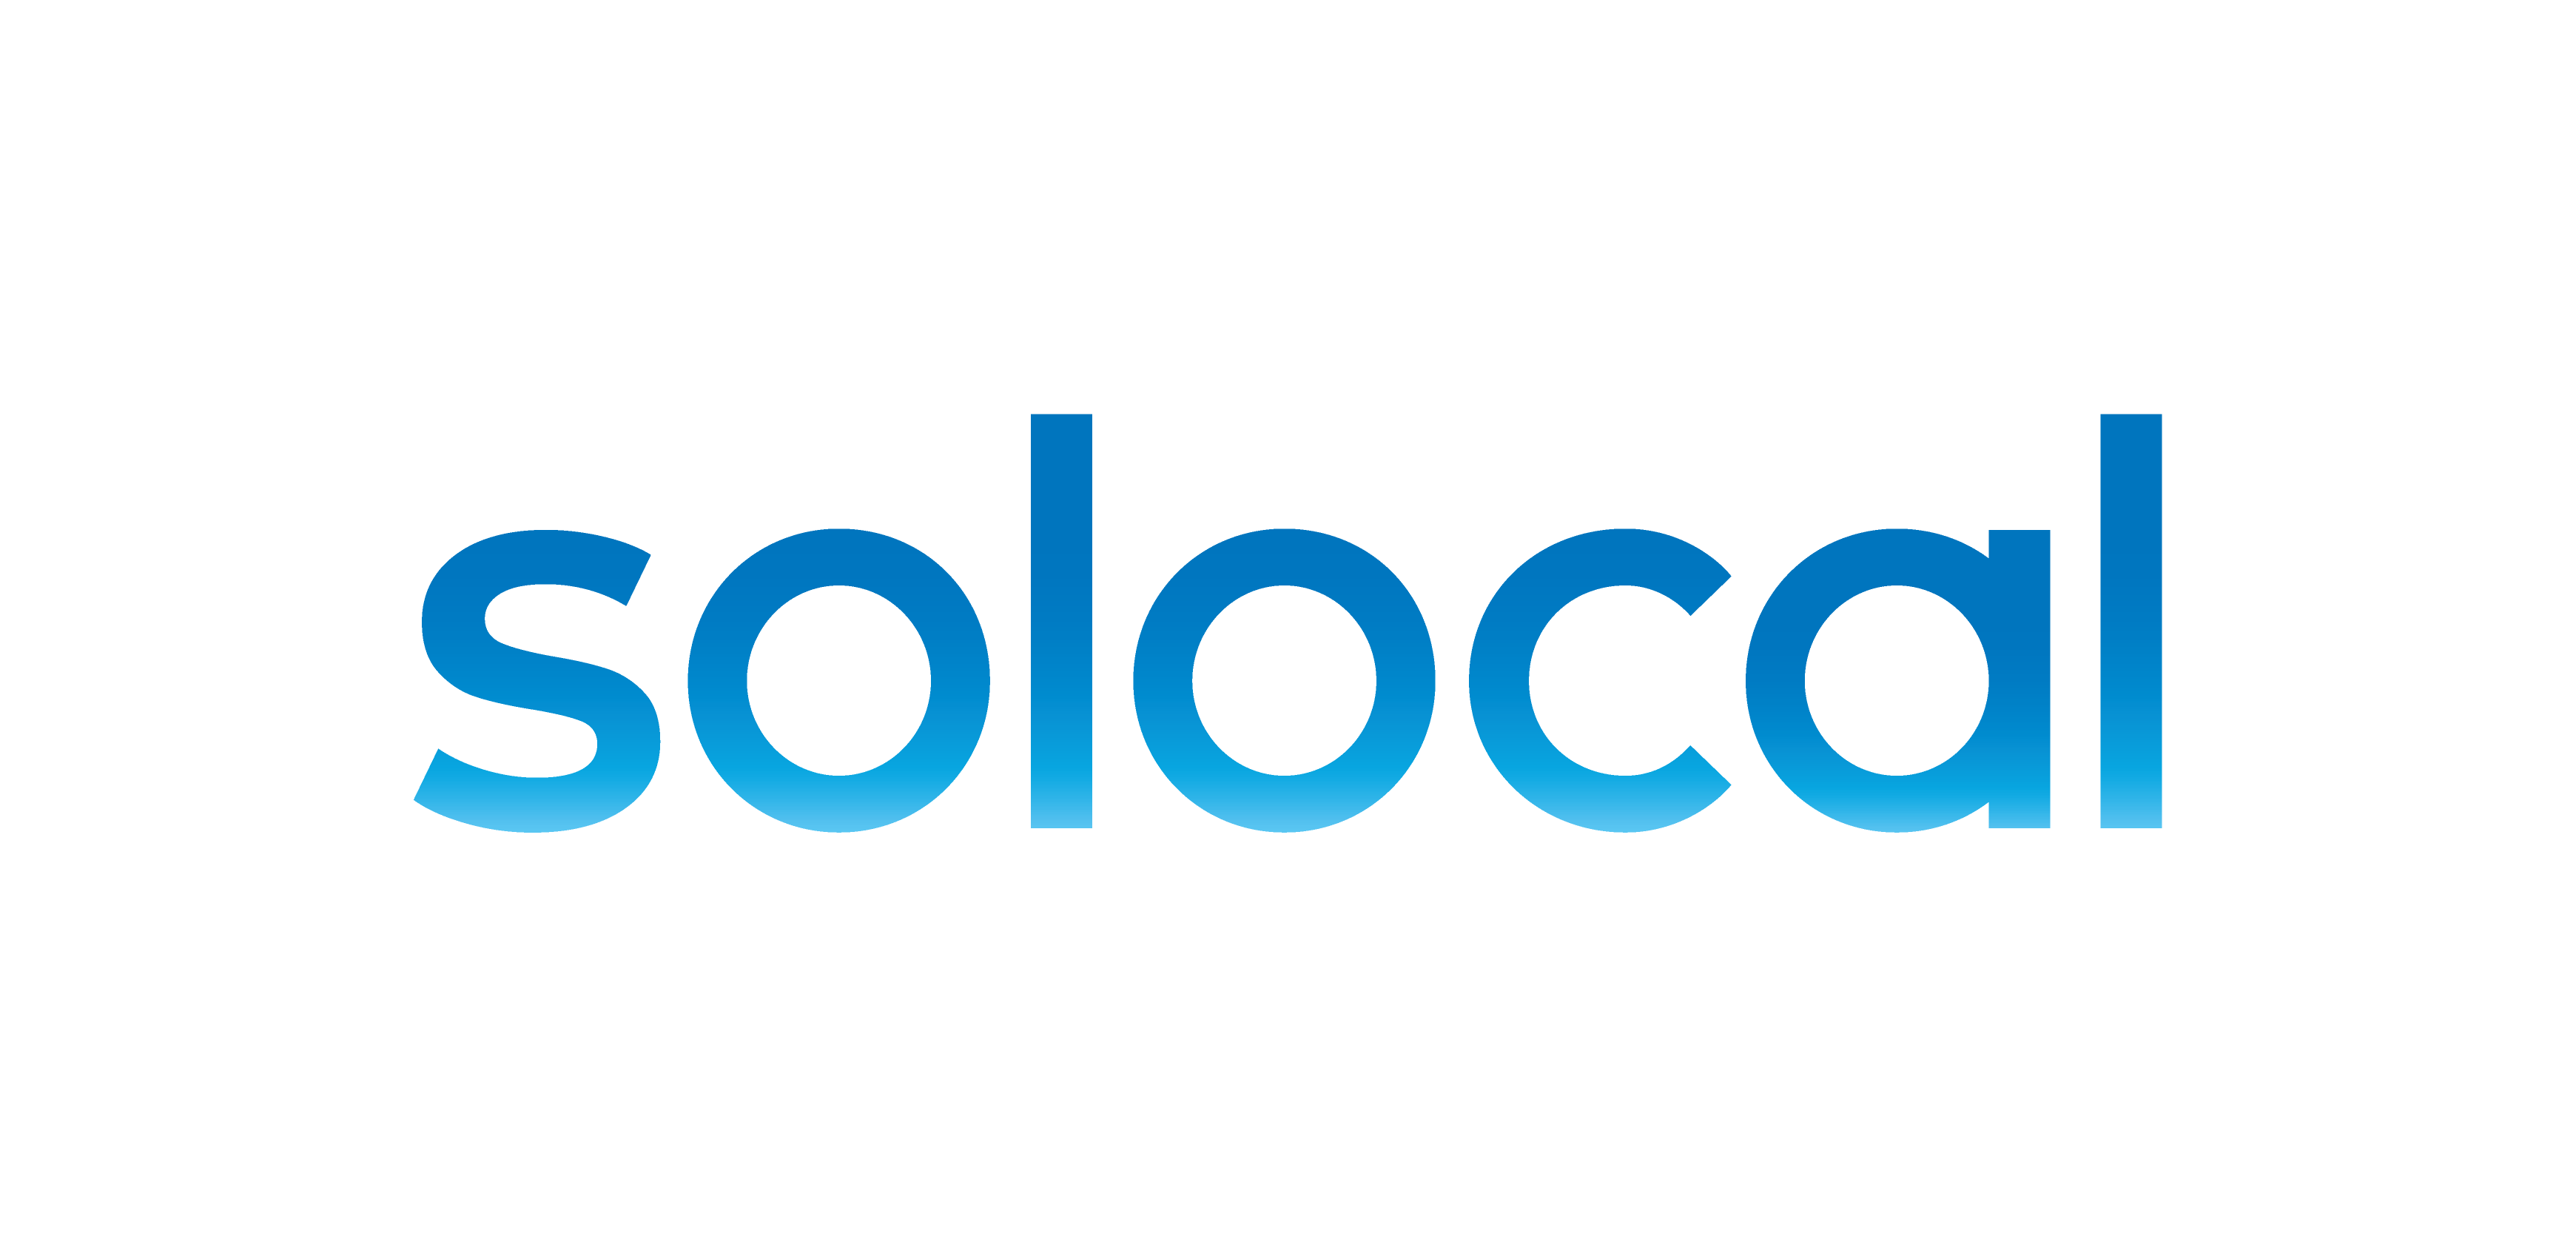 Solocal Groupe